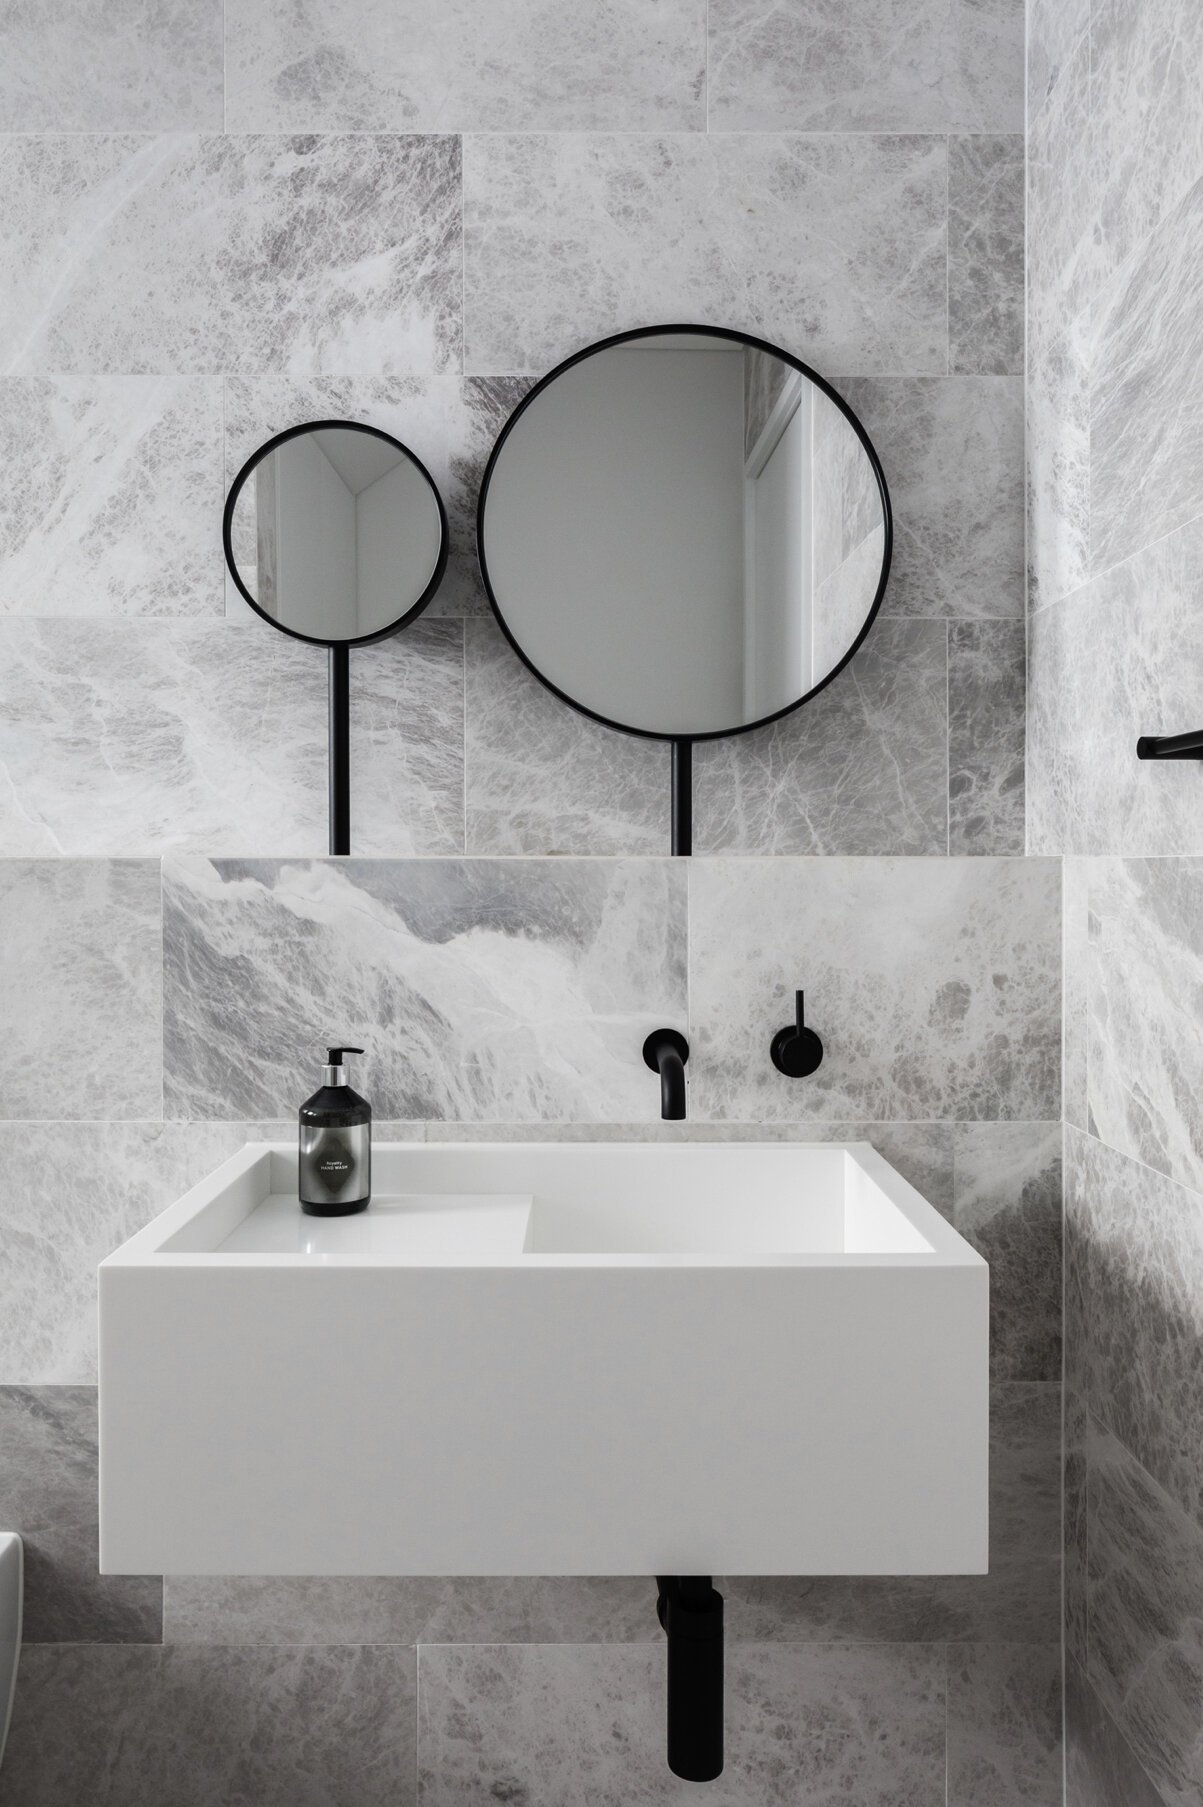 Gray Marble Bathroom Wall Tiles With Brick Tile Pattern Round Black Frame Vanity Mirror And Black Bathroom Faucets